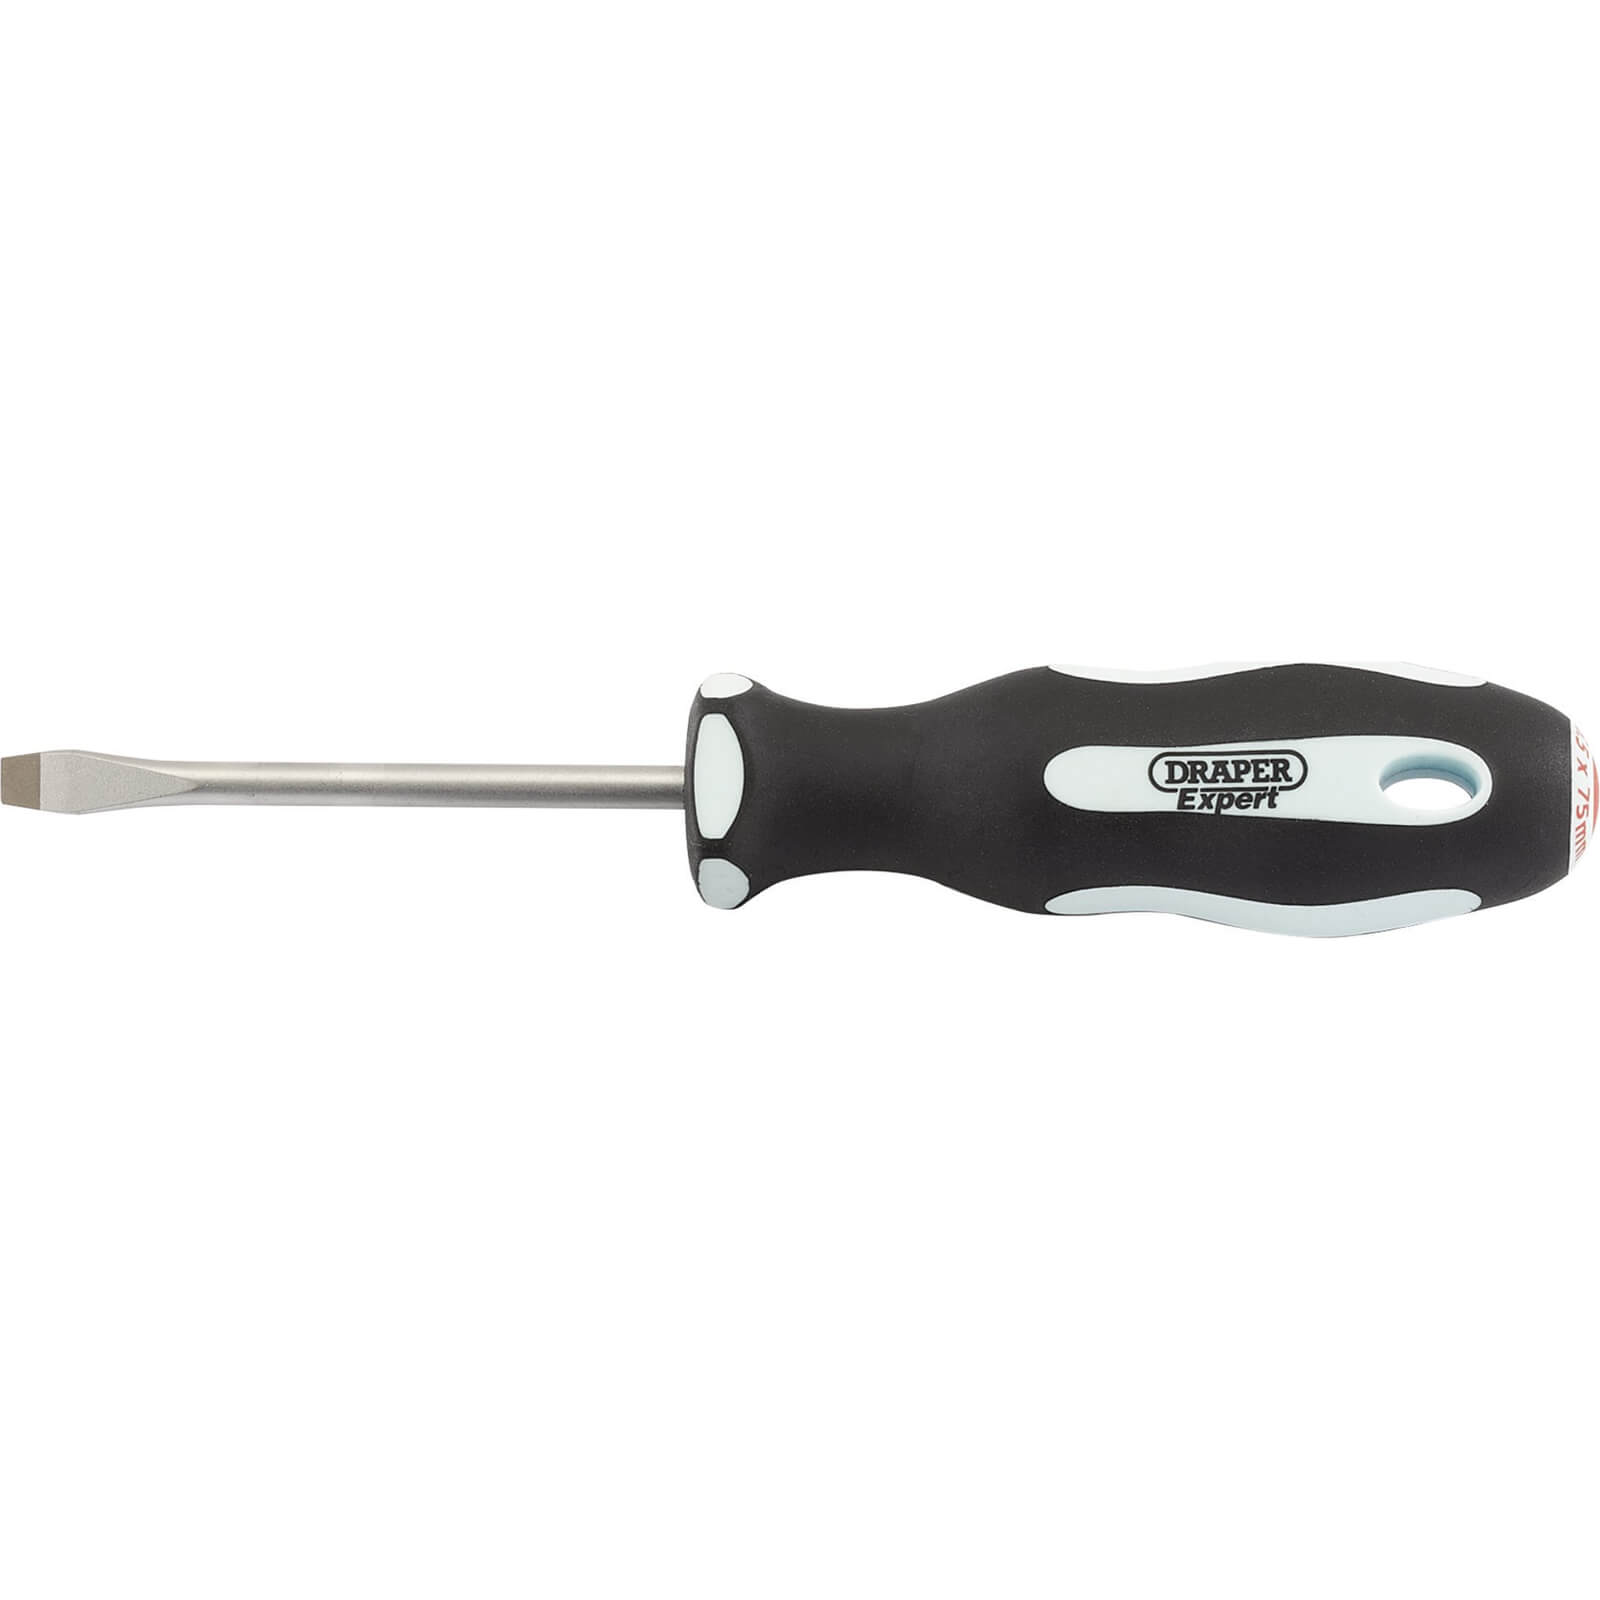 Image of Draper Expert Flared Slotted Screwdriver 5.5mm 75mm